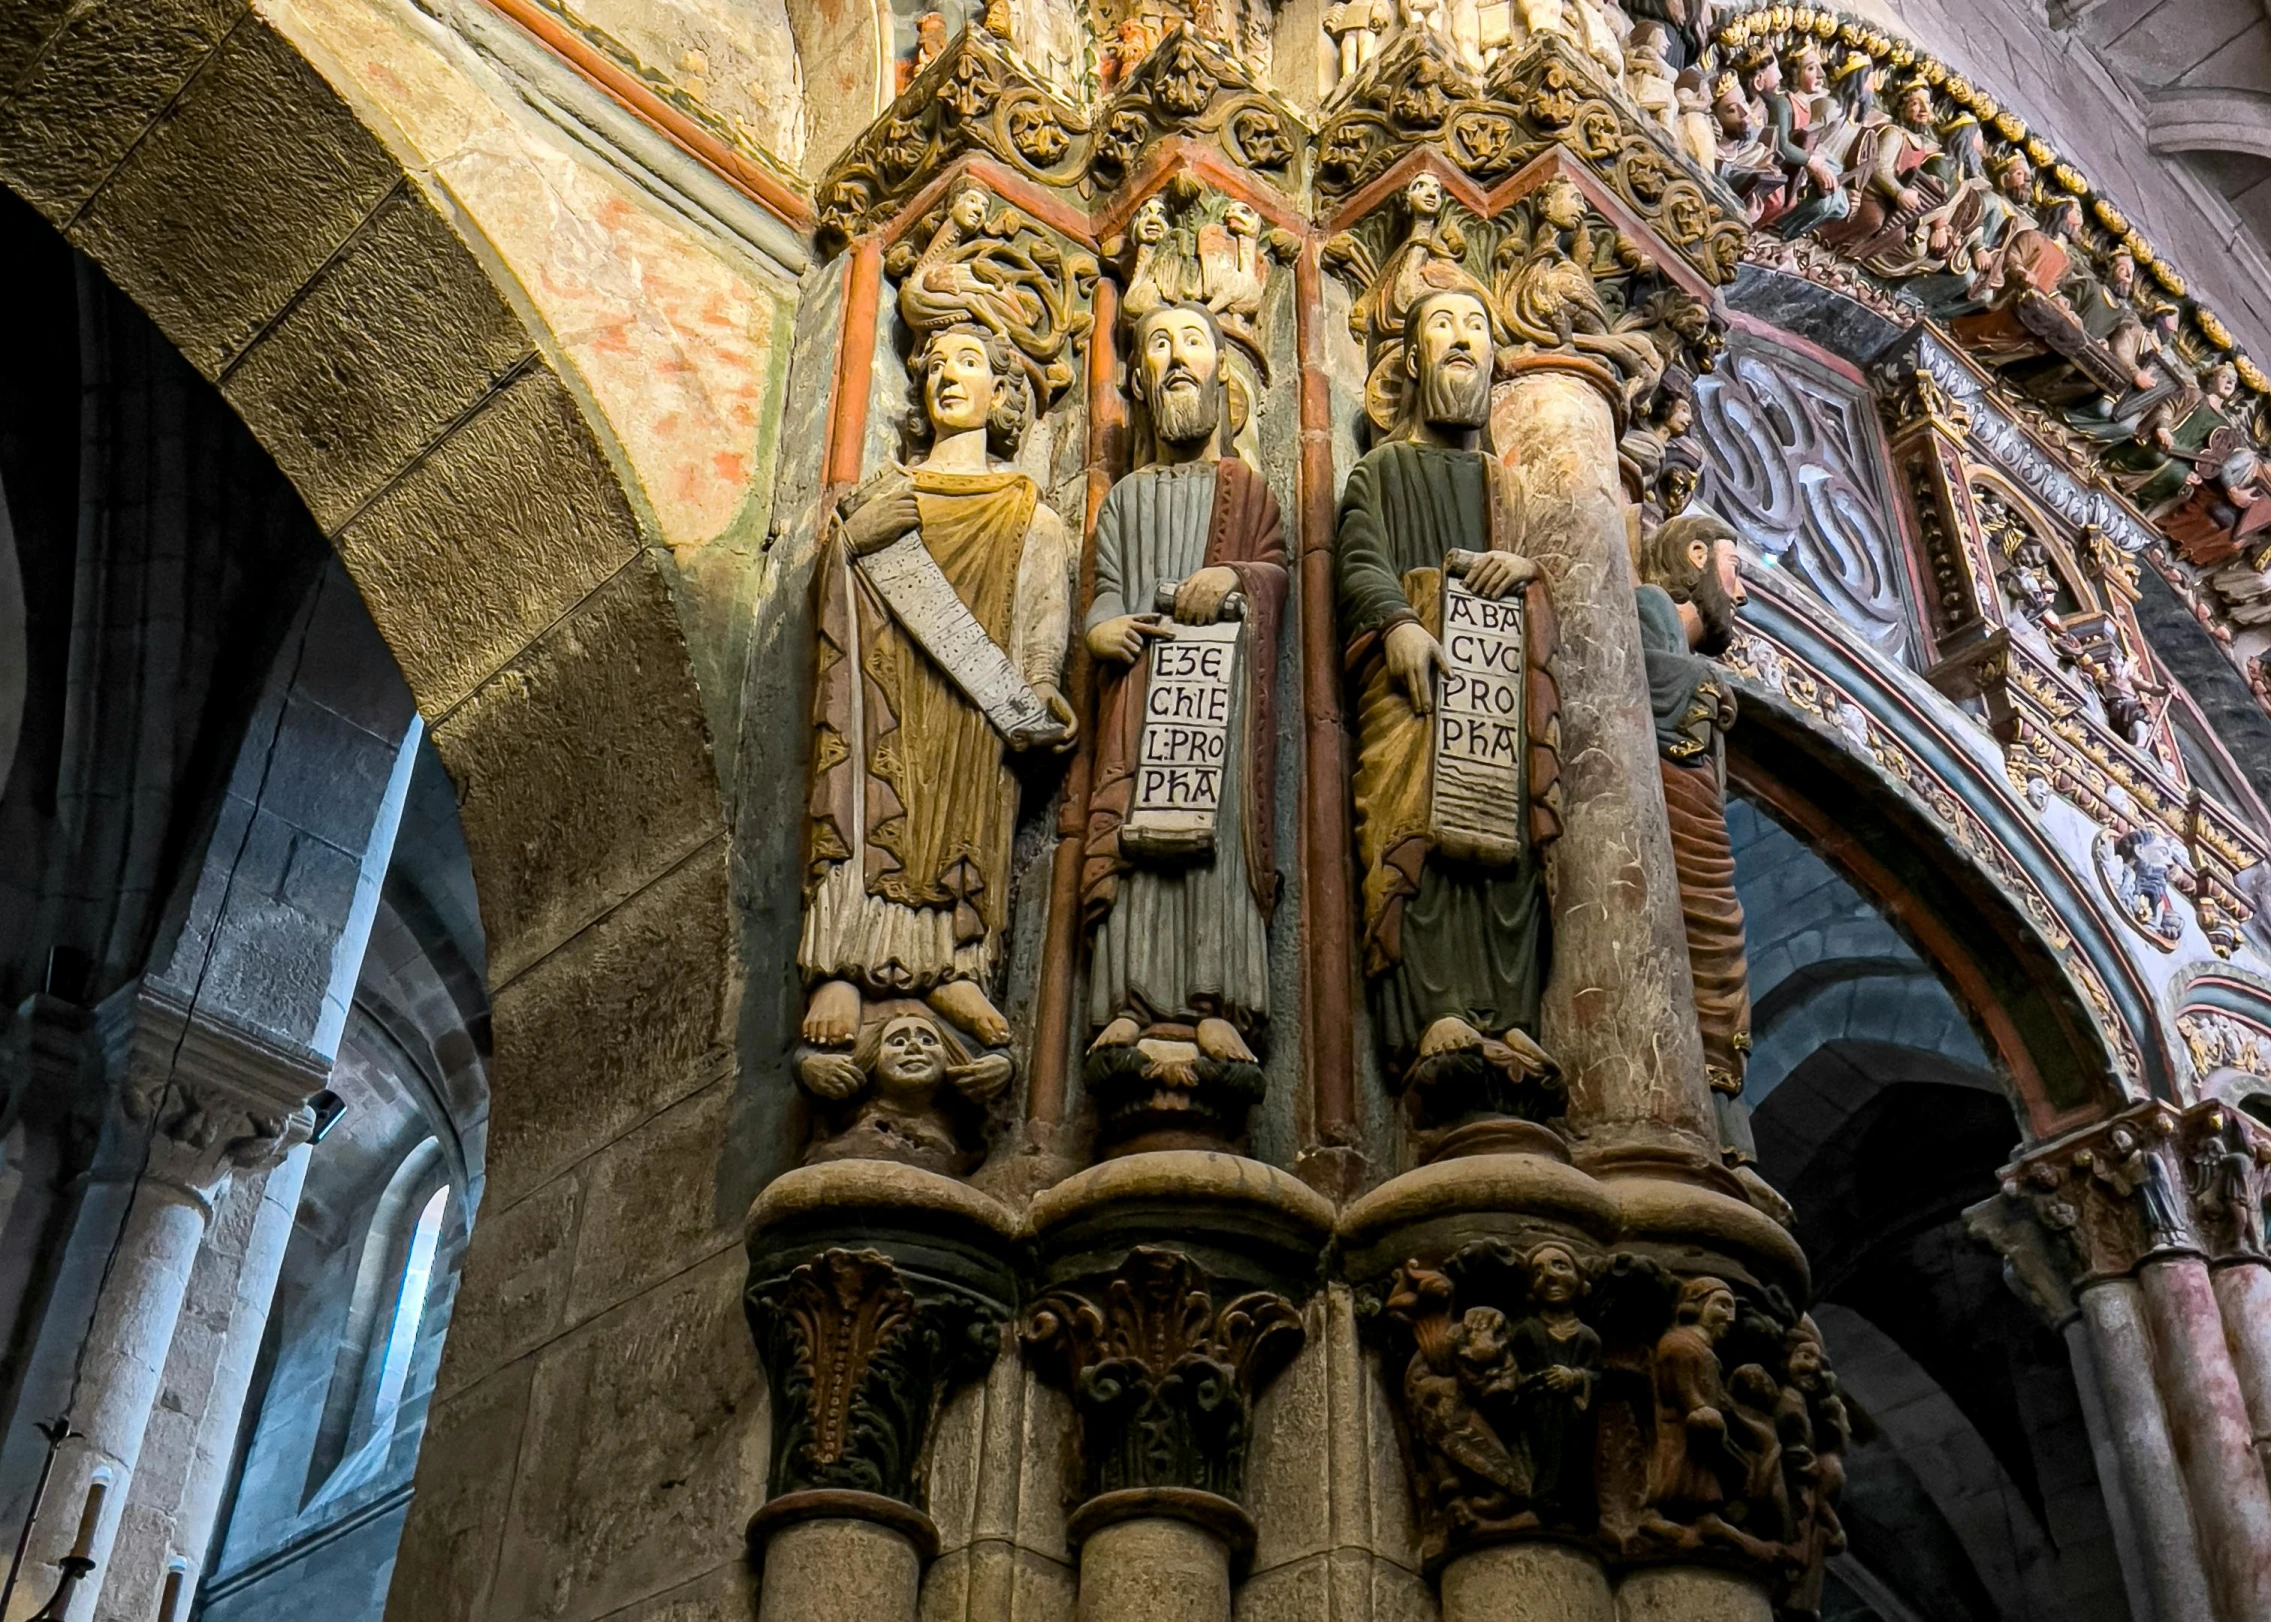 the ornate sculpture on this gothic cathedral has figures to hold them